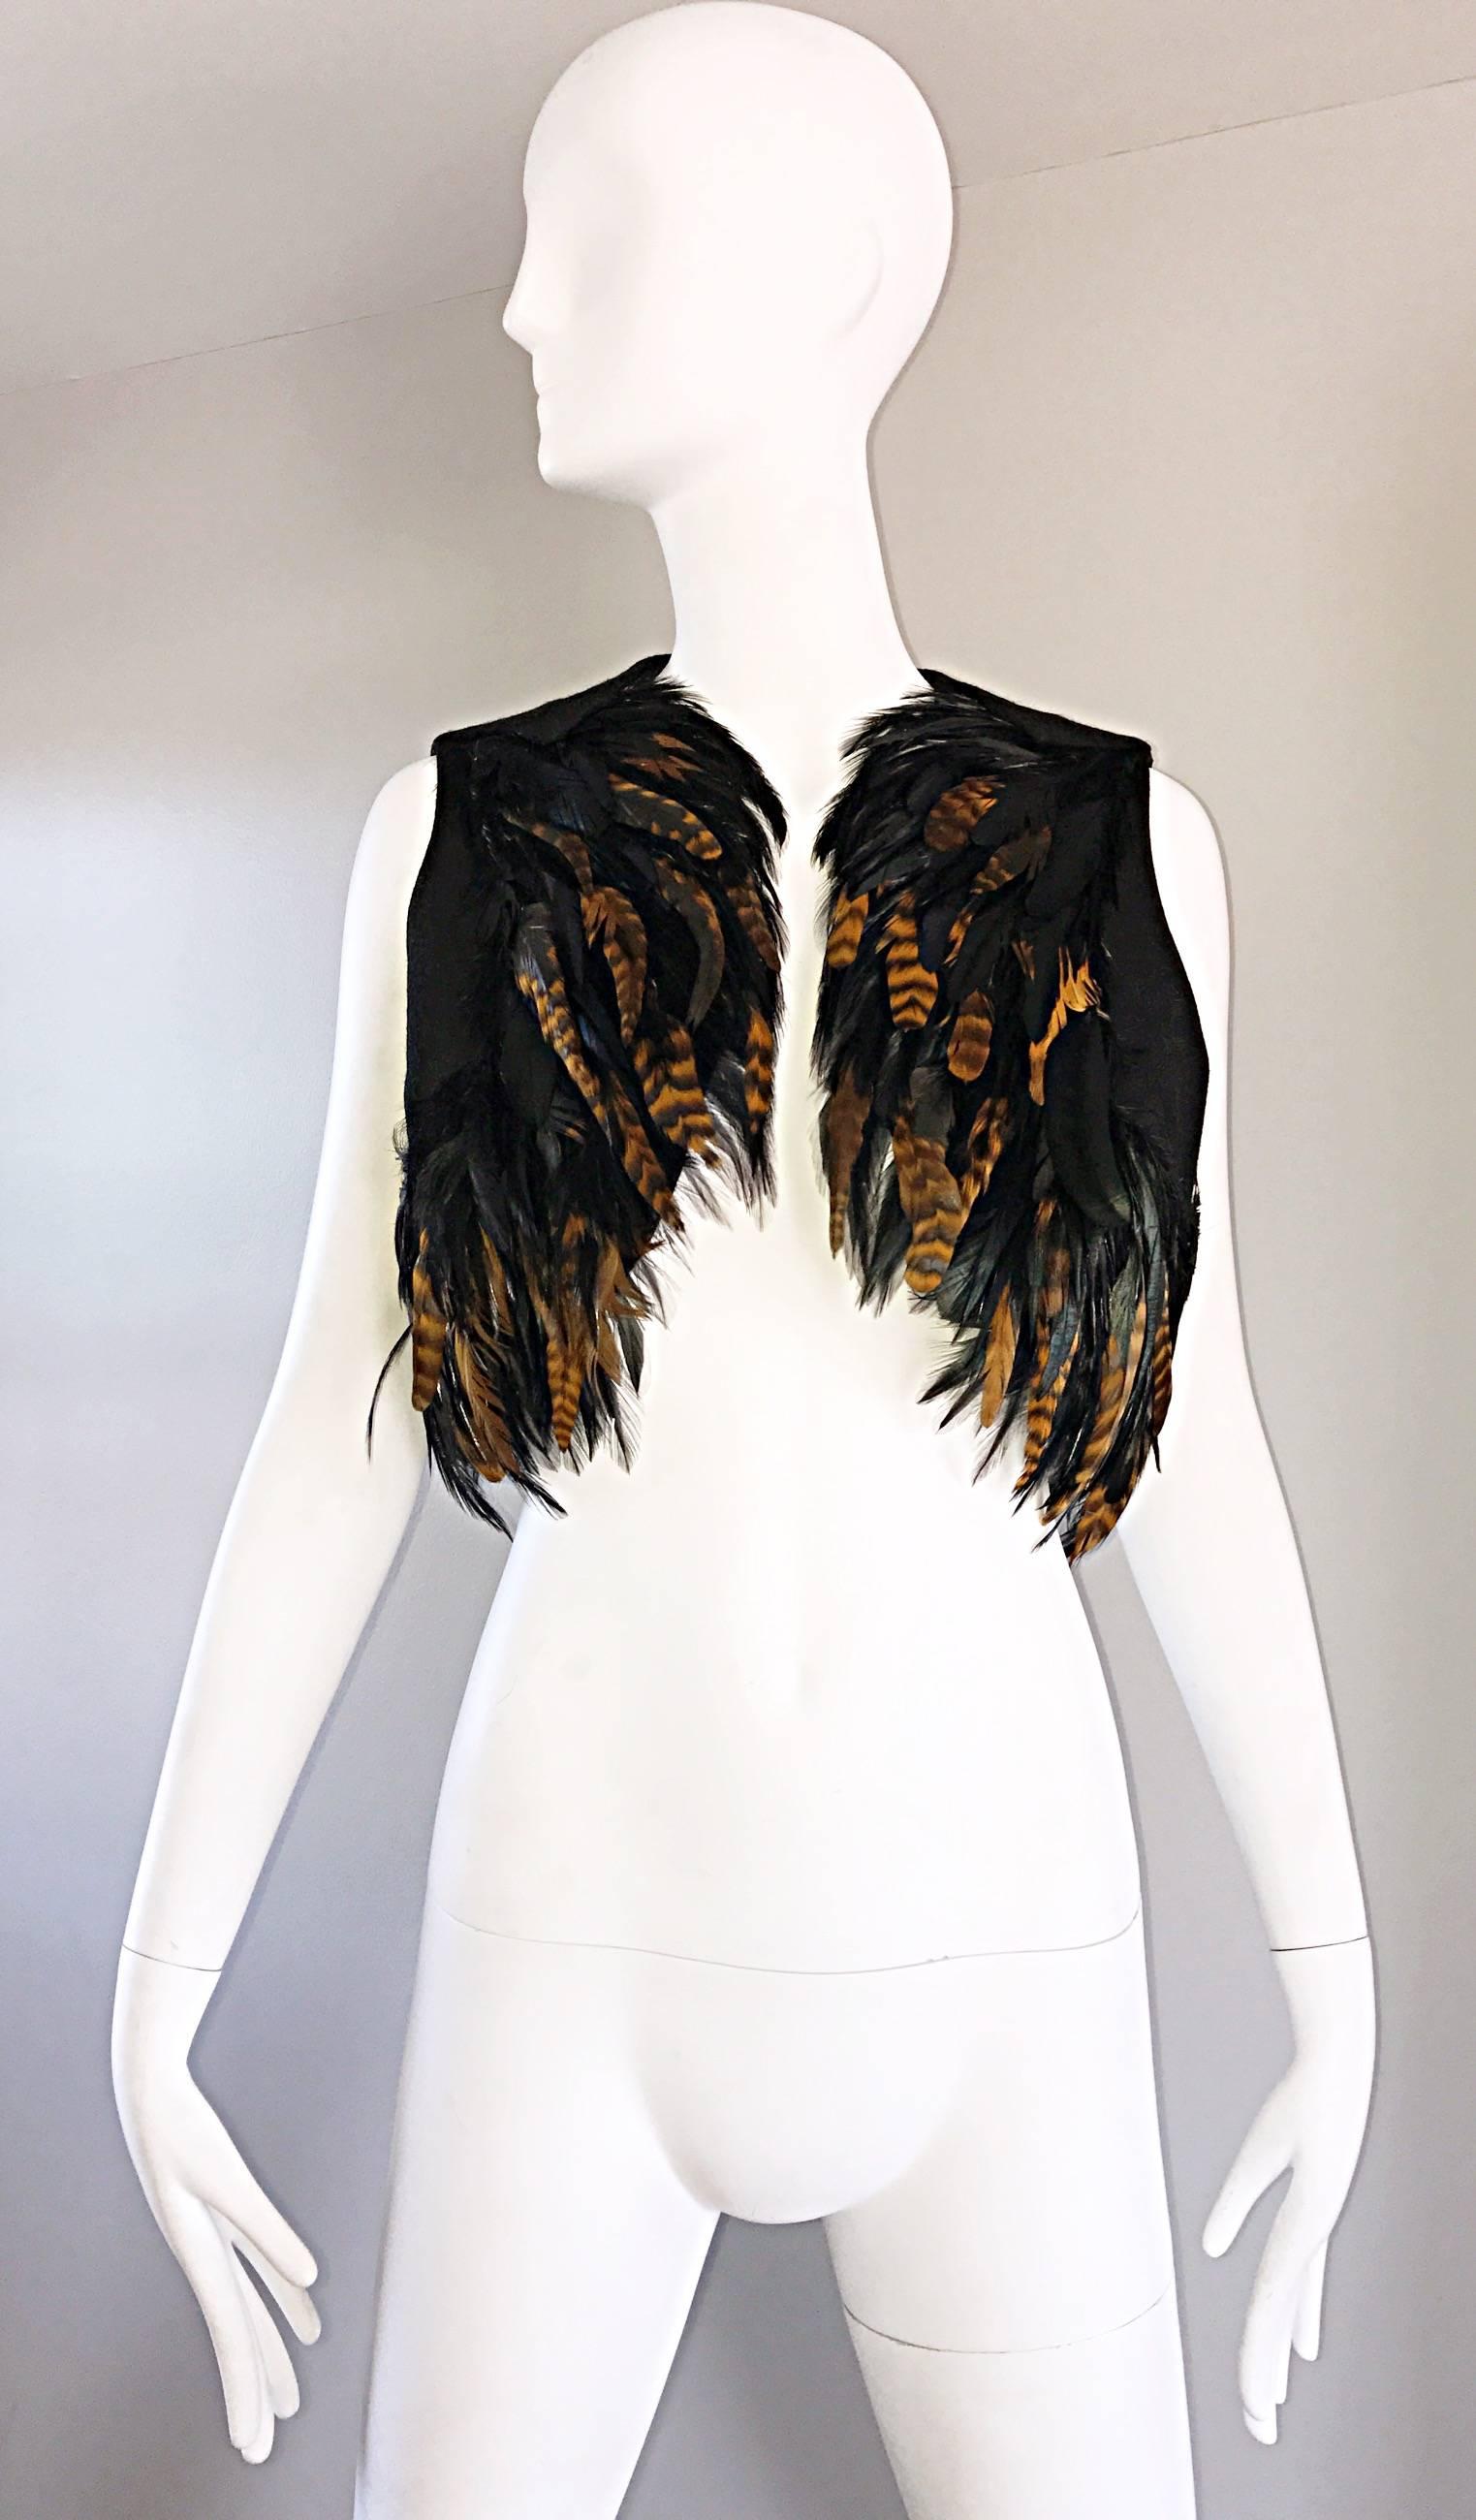 Incredible vintage JOSPEH MAGNIN 1970s feather and wool cropped vest! Features hundreds of brown and black feathers throughout. Black wool back. Great with jeans, shorts, a skirt, trousers, or over a dress. In great condition. Made in USA.